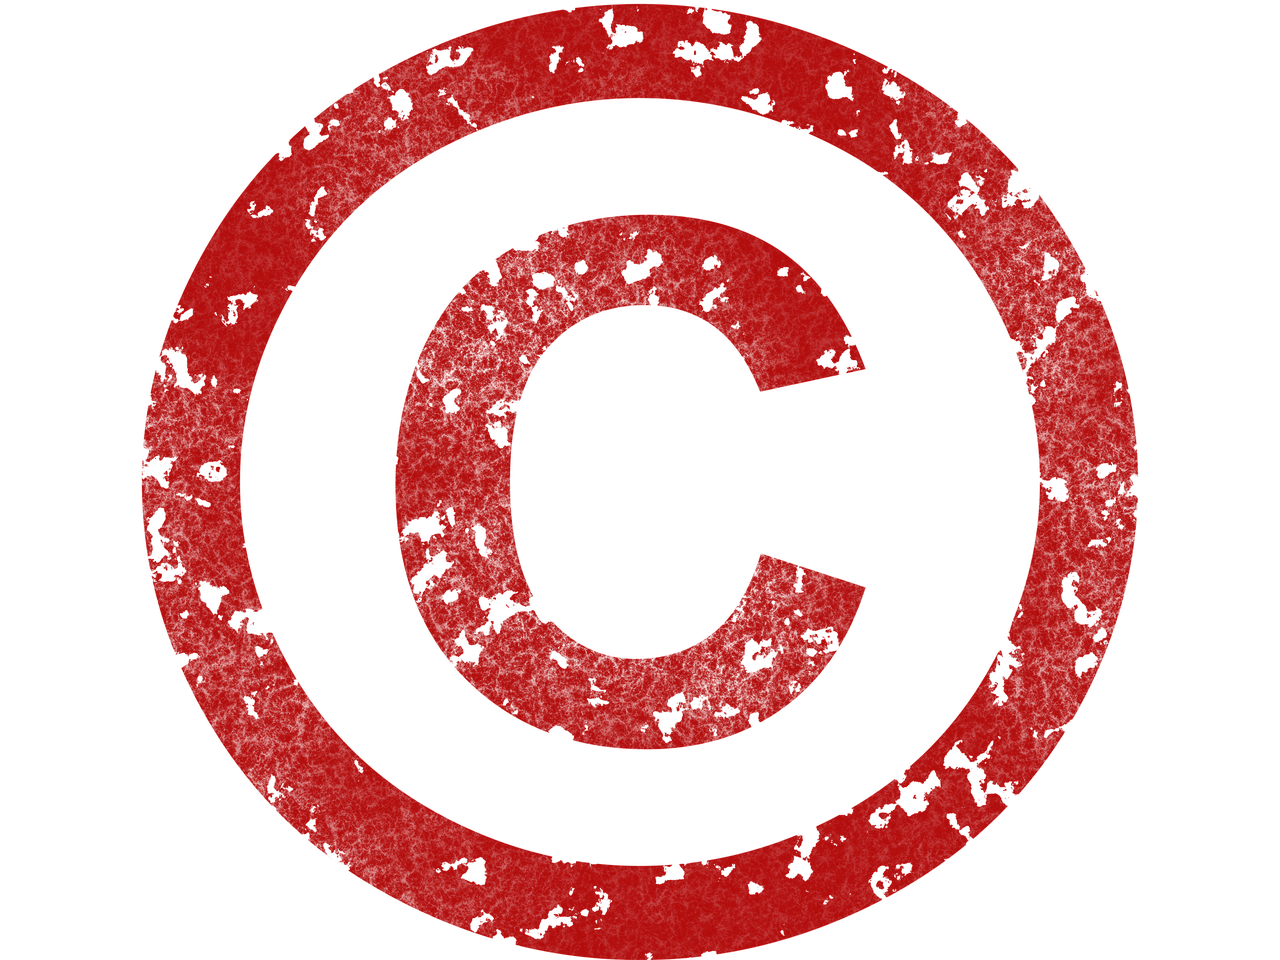 copyright, legal, protection-5267127.jpg